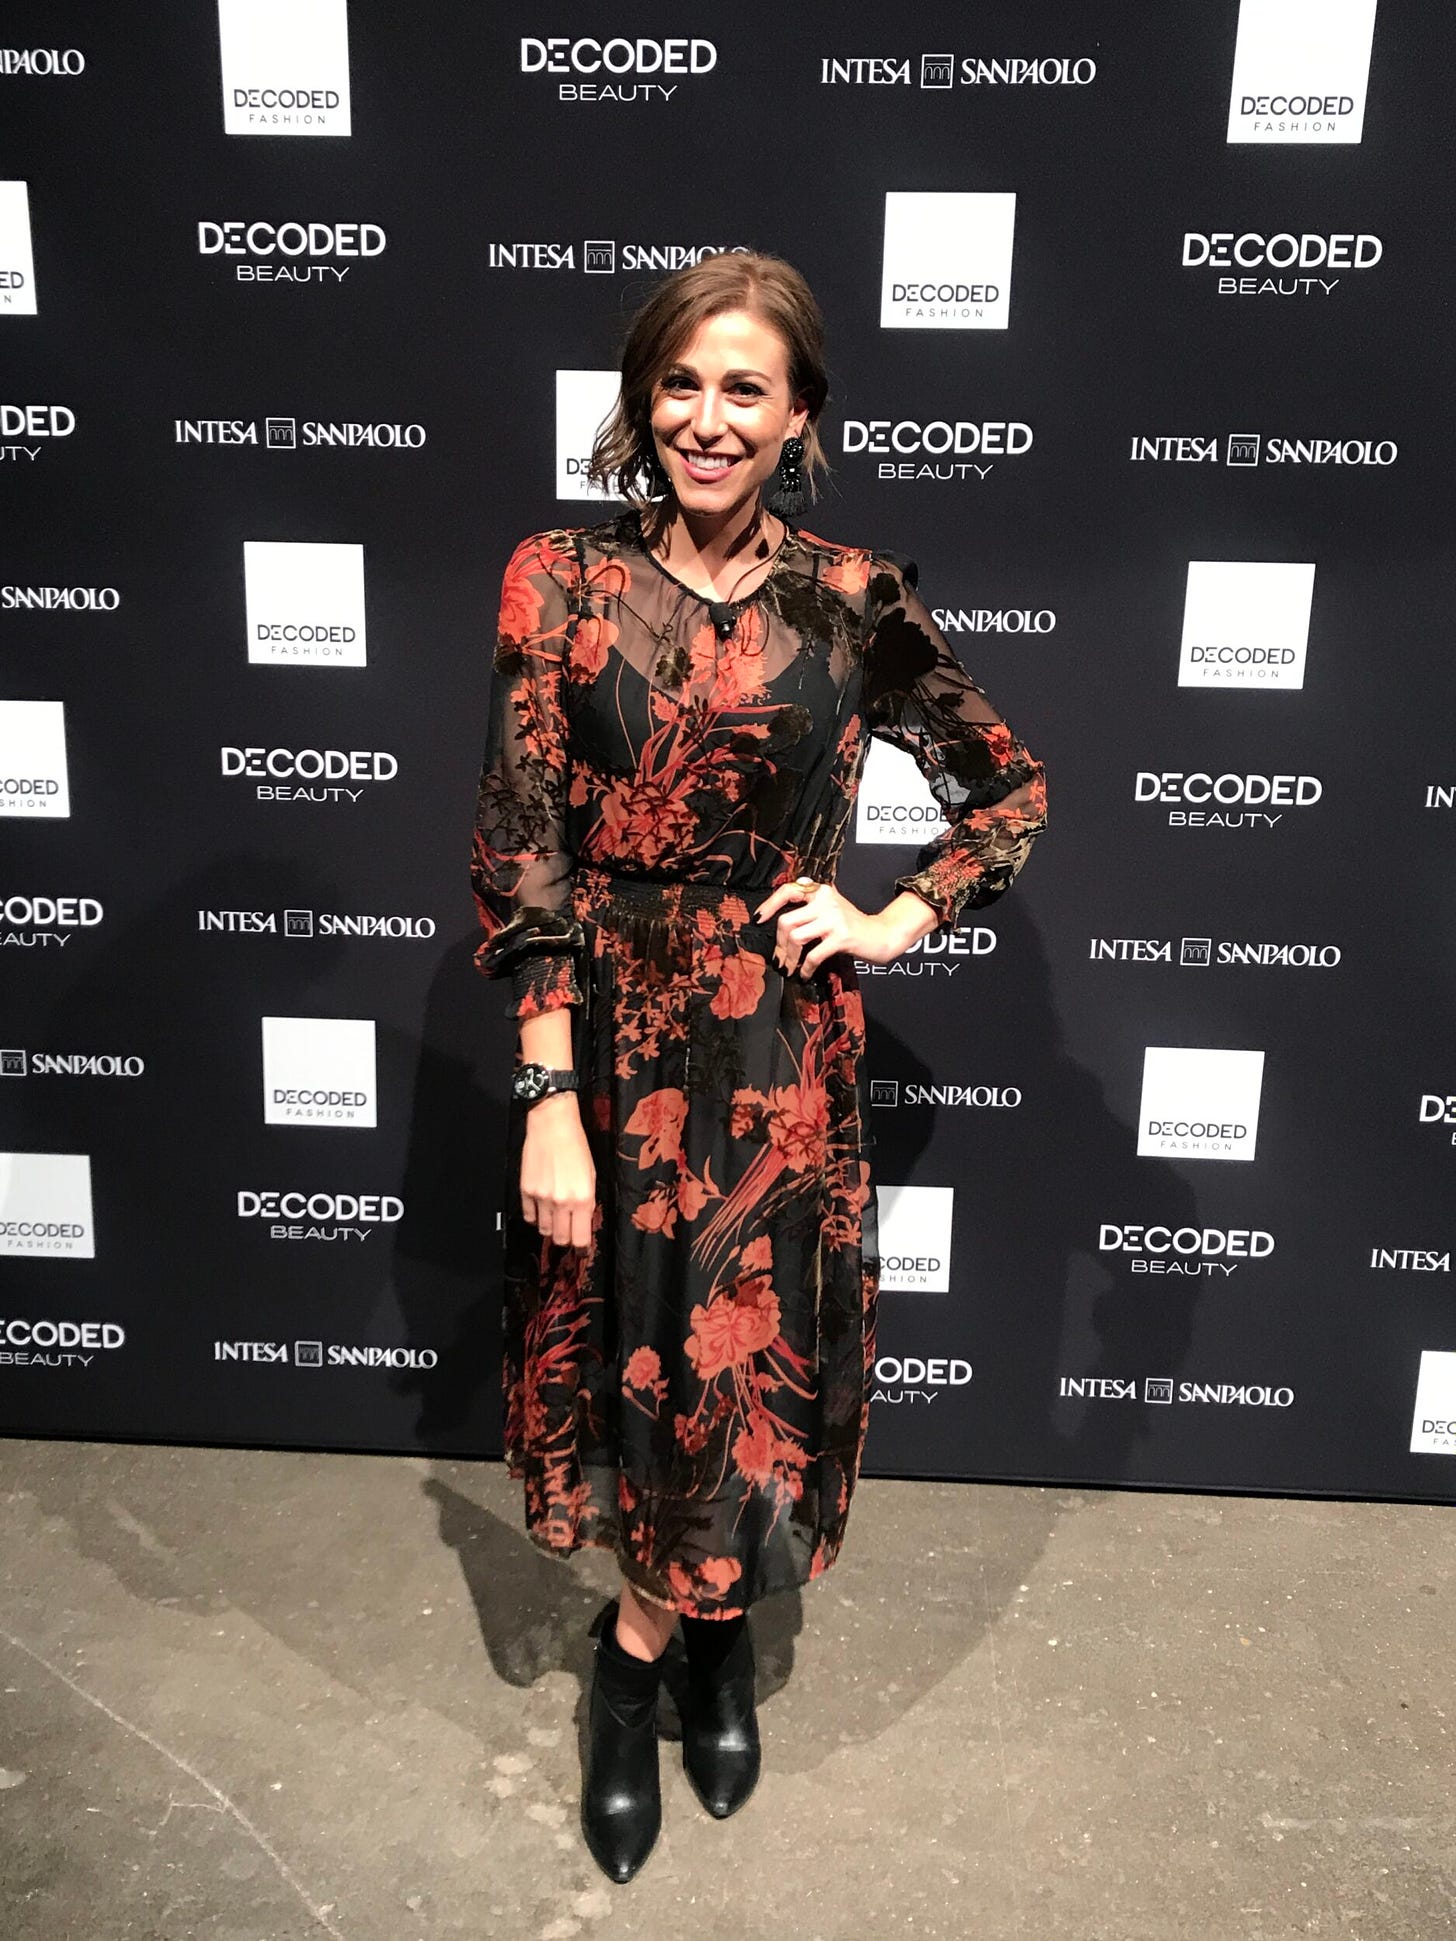 Amanda Cosco at the step and repeat for Decoded Fashion New York